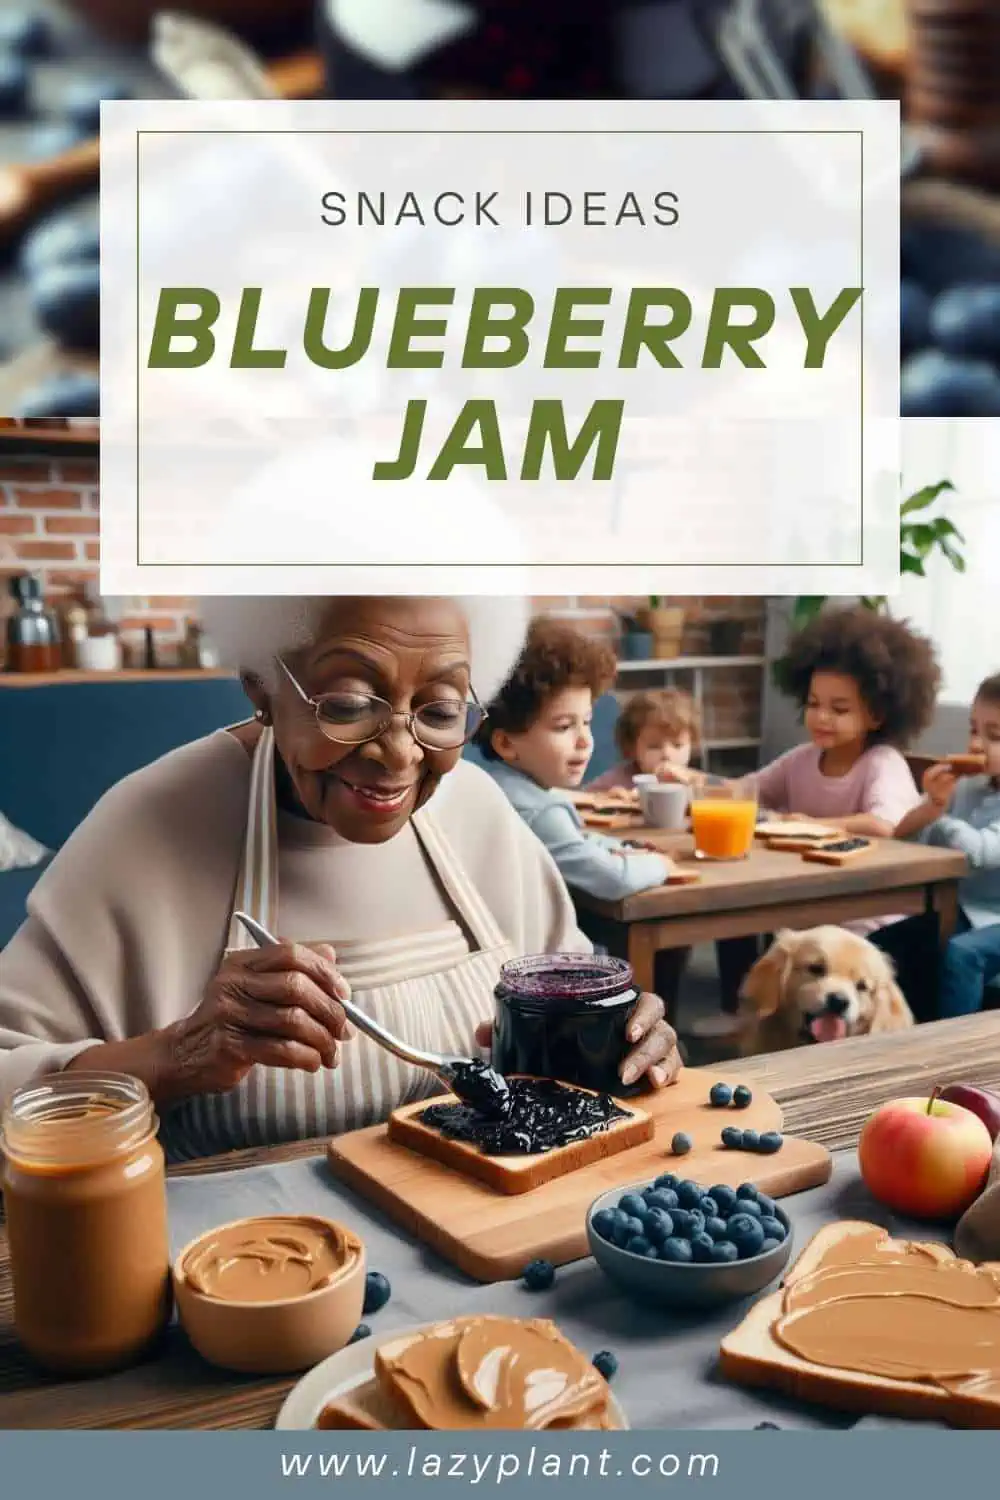 Snack ideas with blueberry jam for Weight Loss.